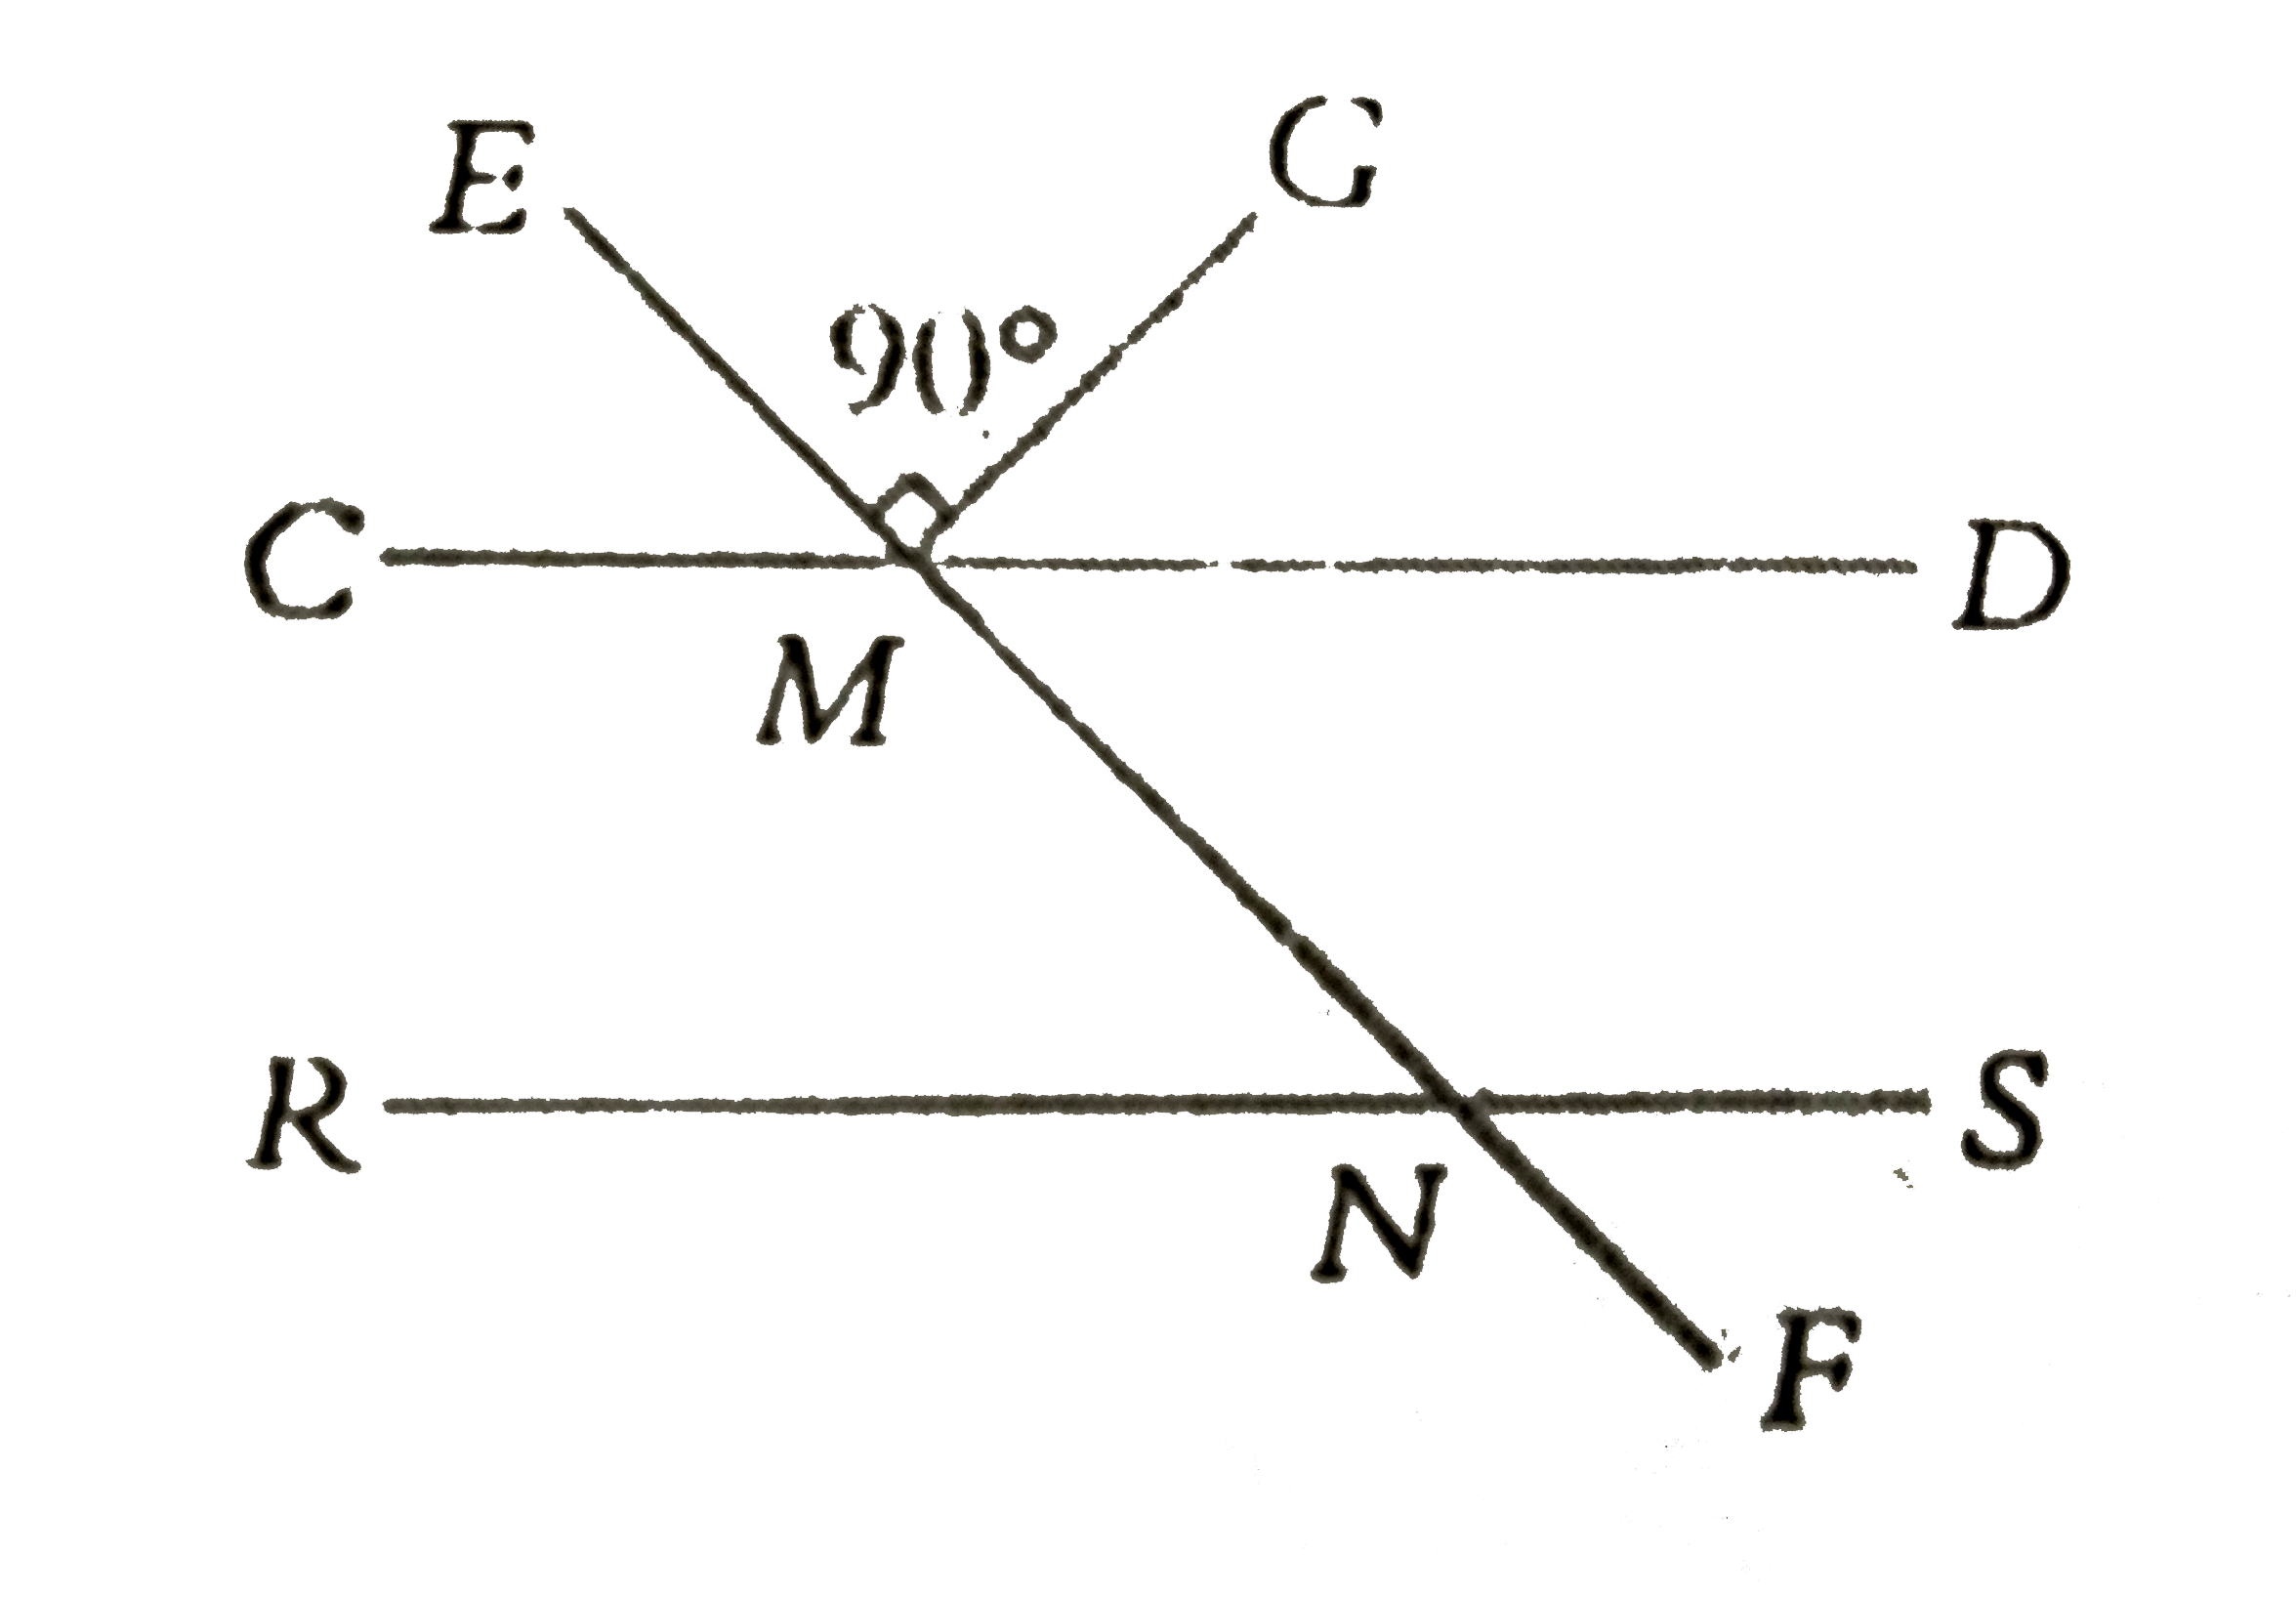 In the figure below ( not to scale)  bar(CD)||bar(RS) /EMG=90^(@),/GMD= gamma^(@),/CME= x^(@)  and gamma^(@)=(x^(@))/(2). / FNS : /FNR is